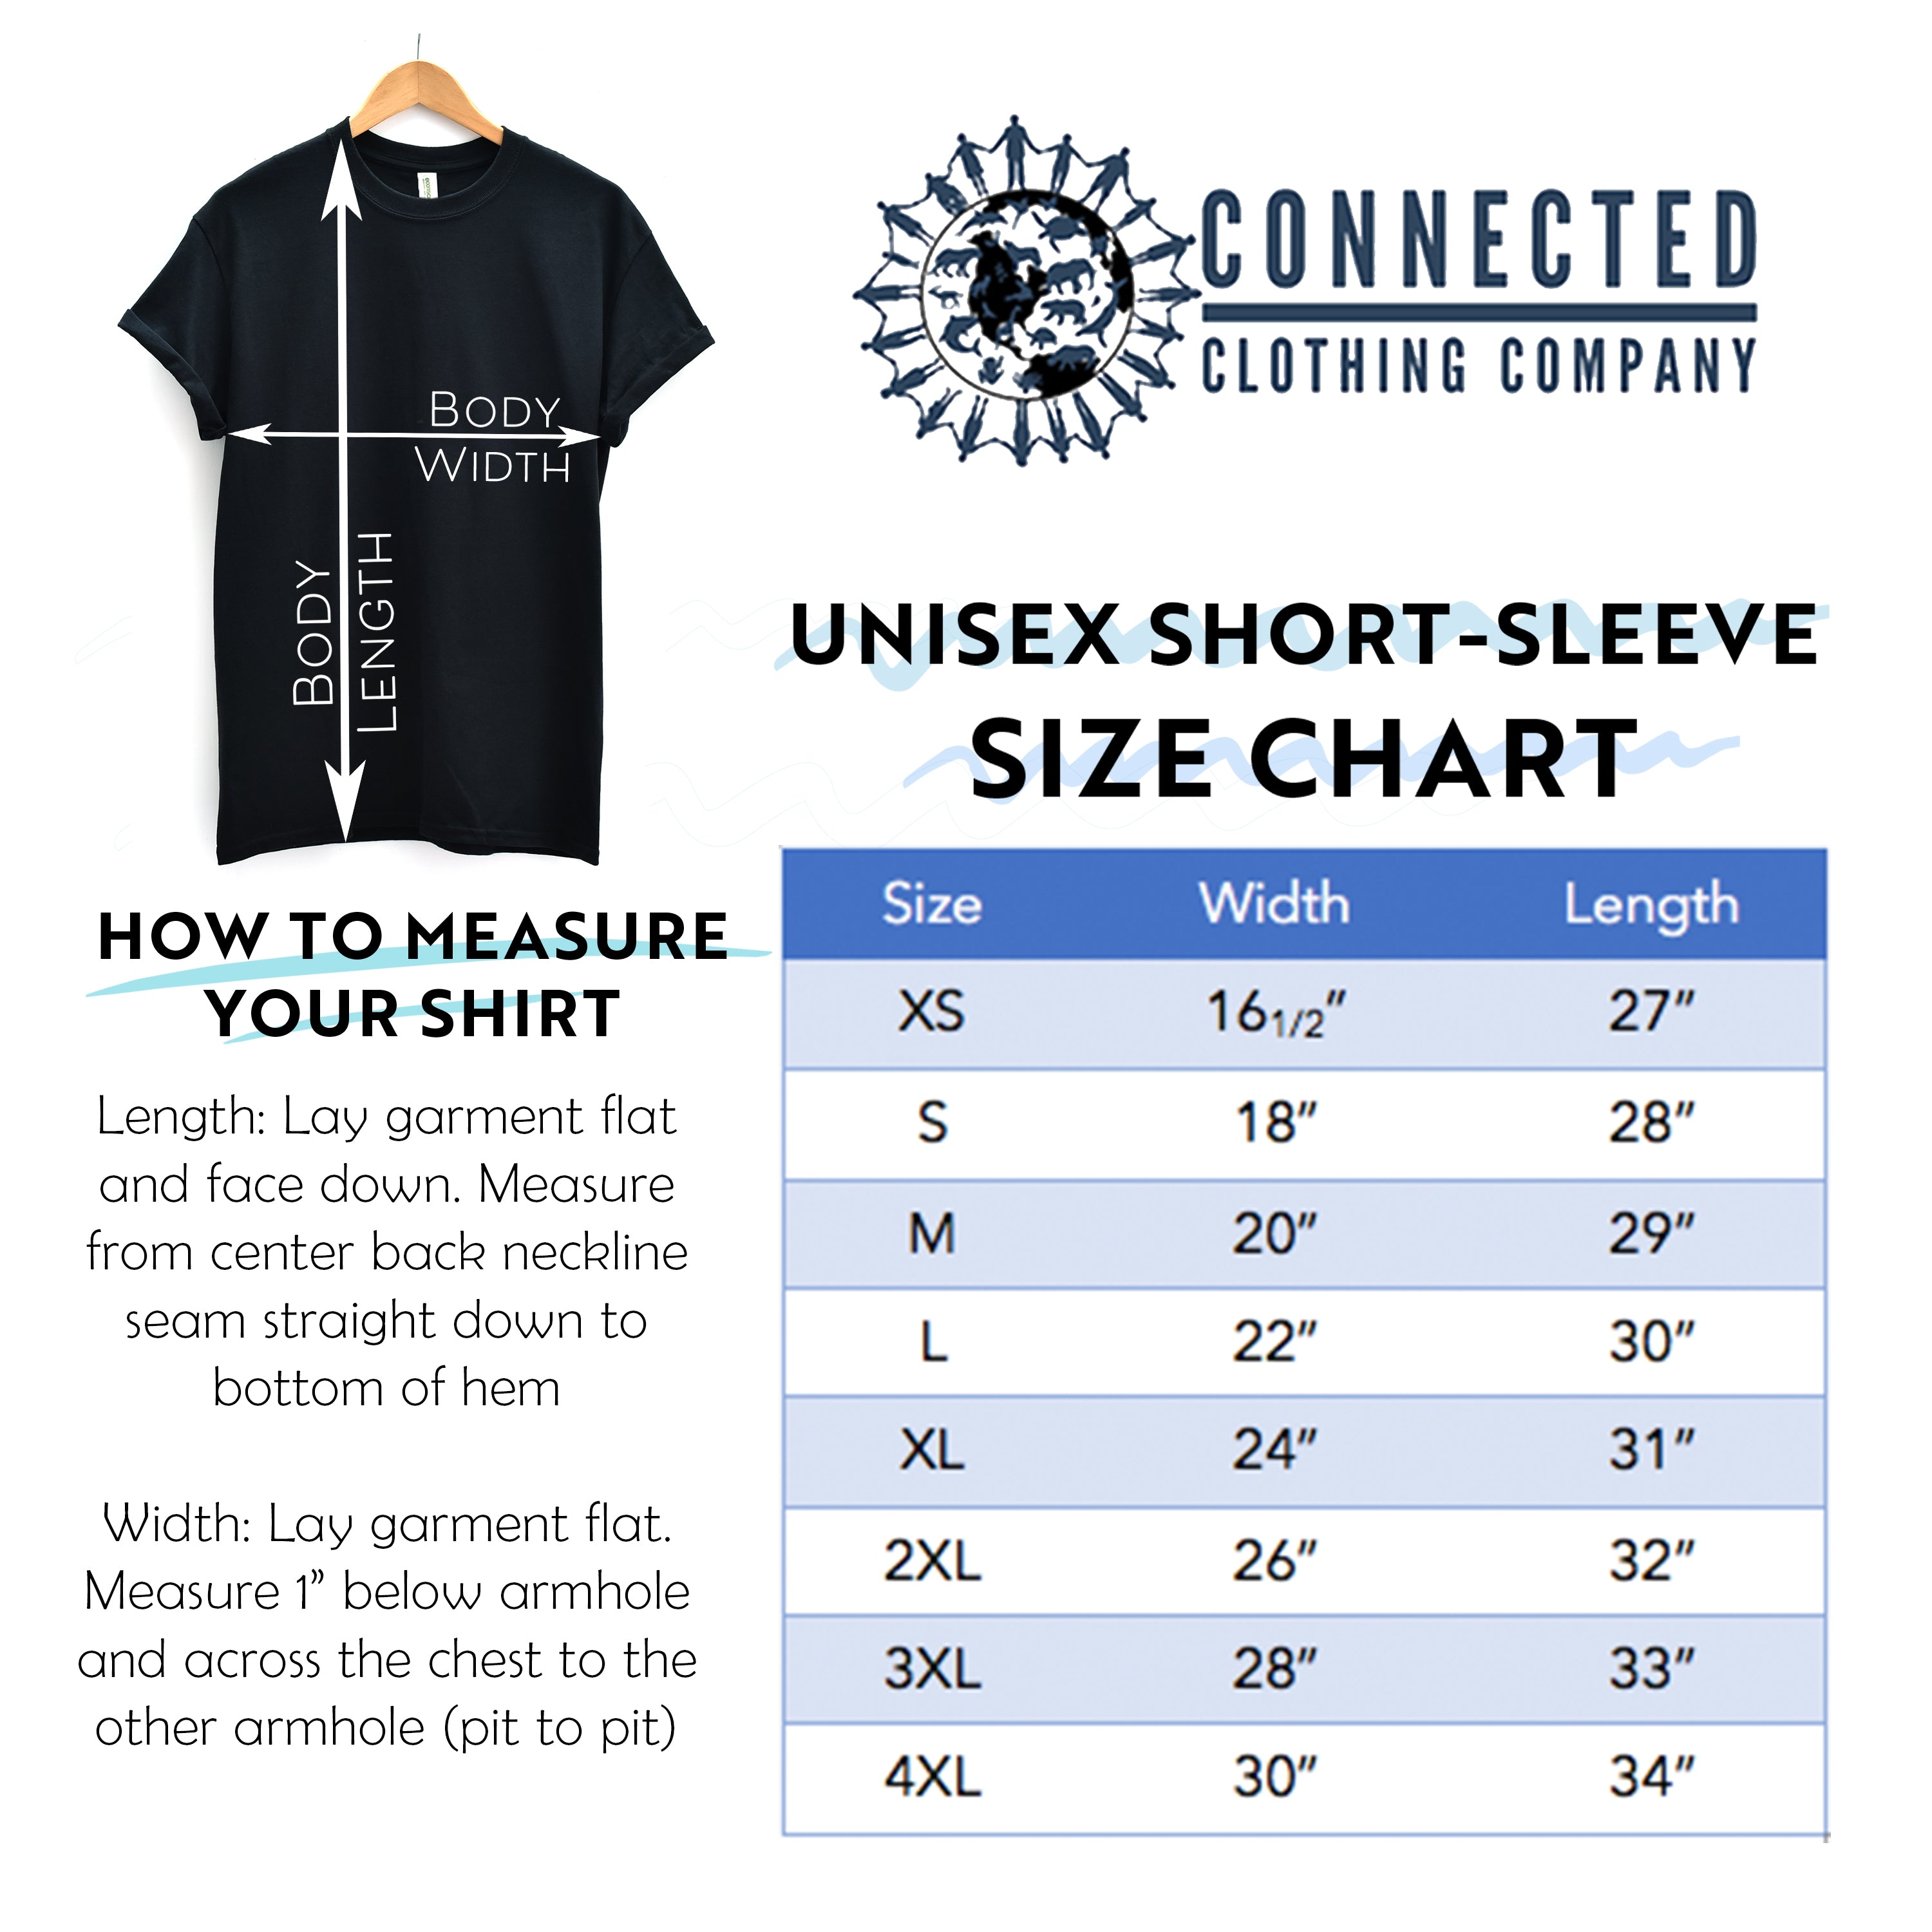 Unisex Short-Sleeve Tee Size Chart - sweetsherriloudesigns - Ethically and Sustainably Made - 10% donated to Mission Blue ocean conservation